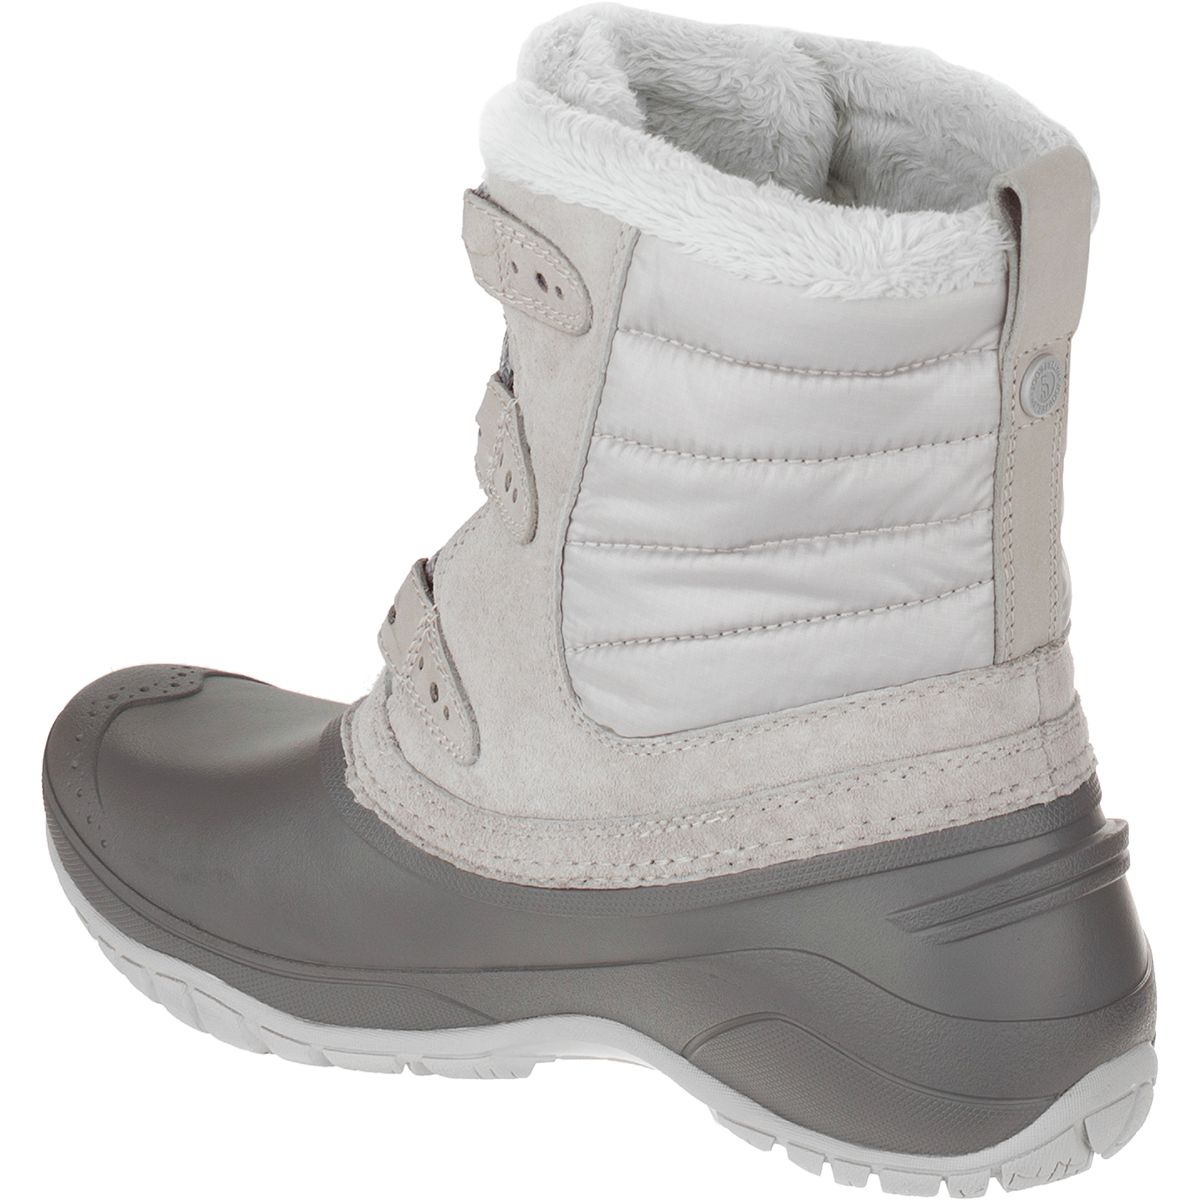 The North Face Shellista II Shorty Boot - Women's | Backcountry.com